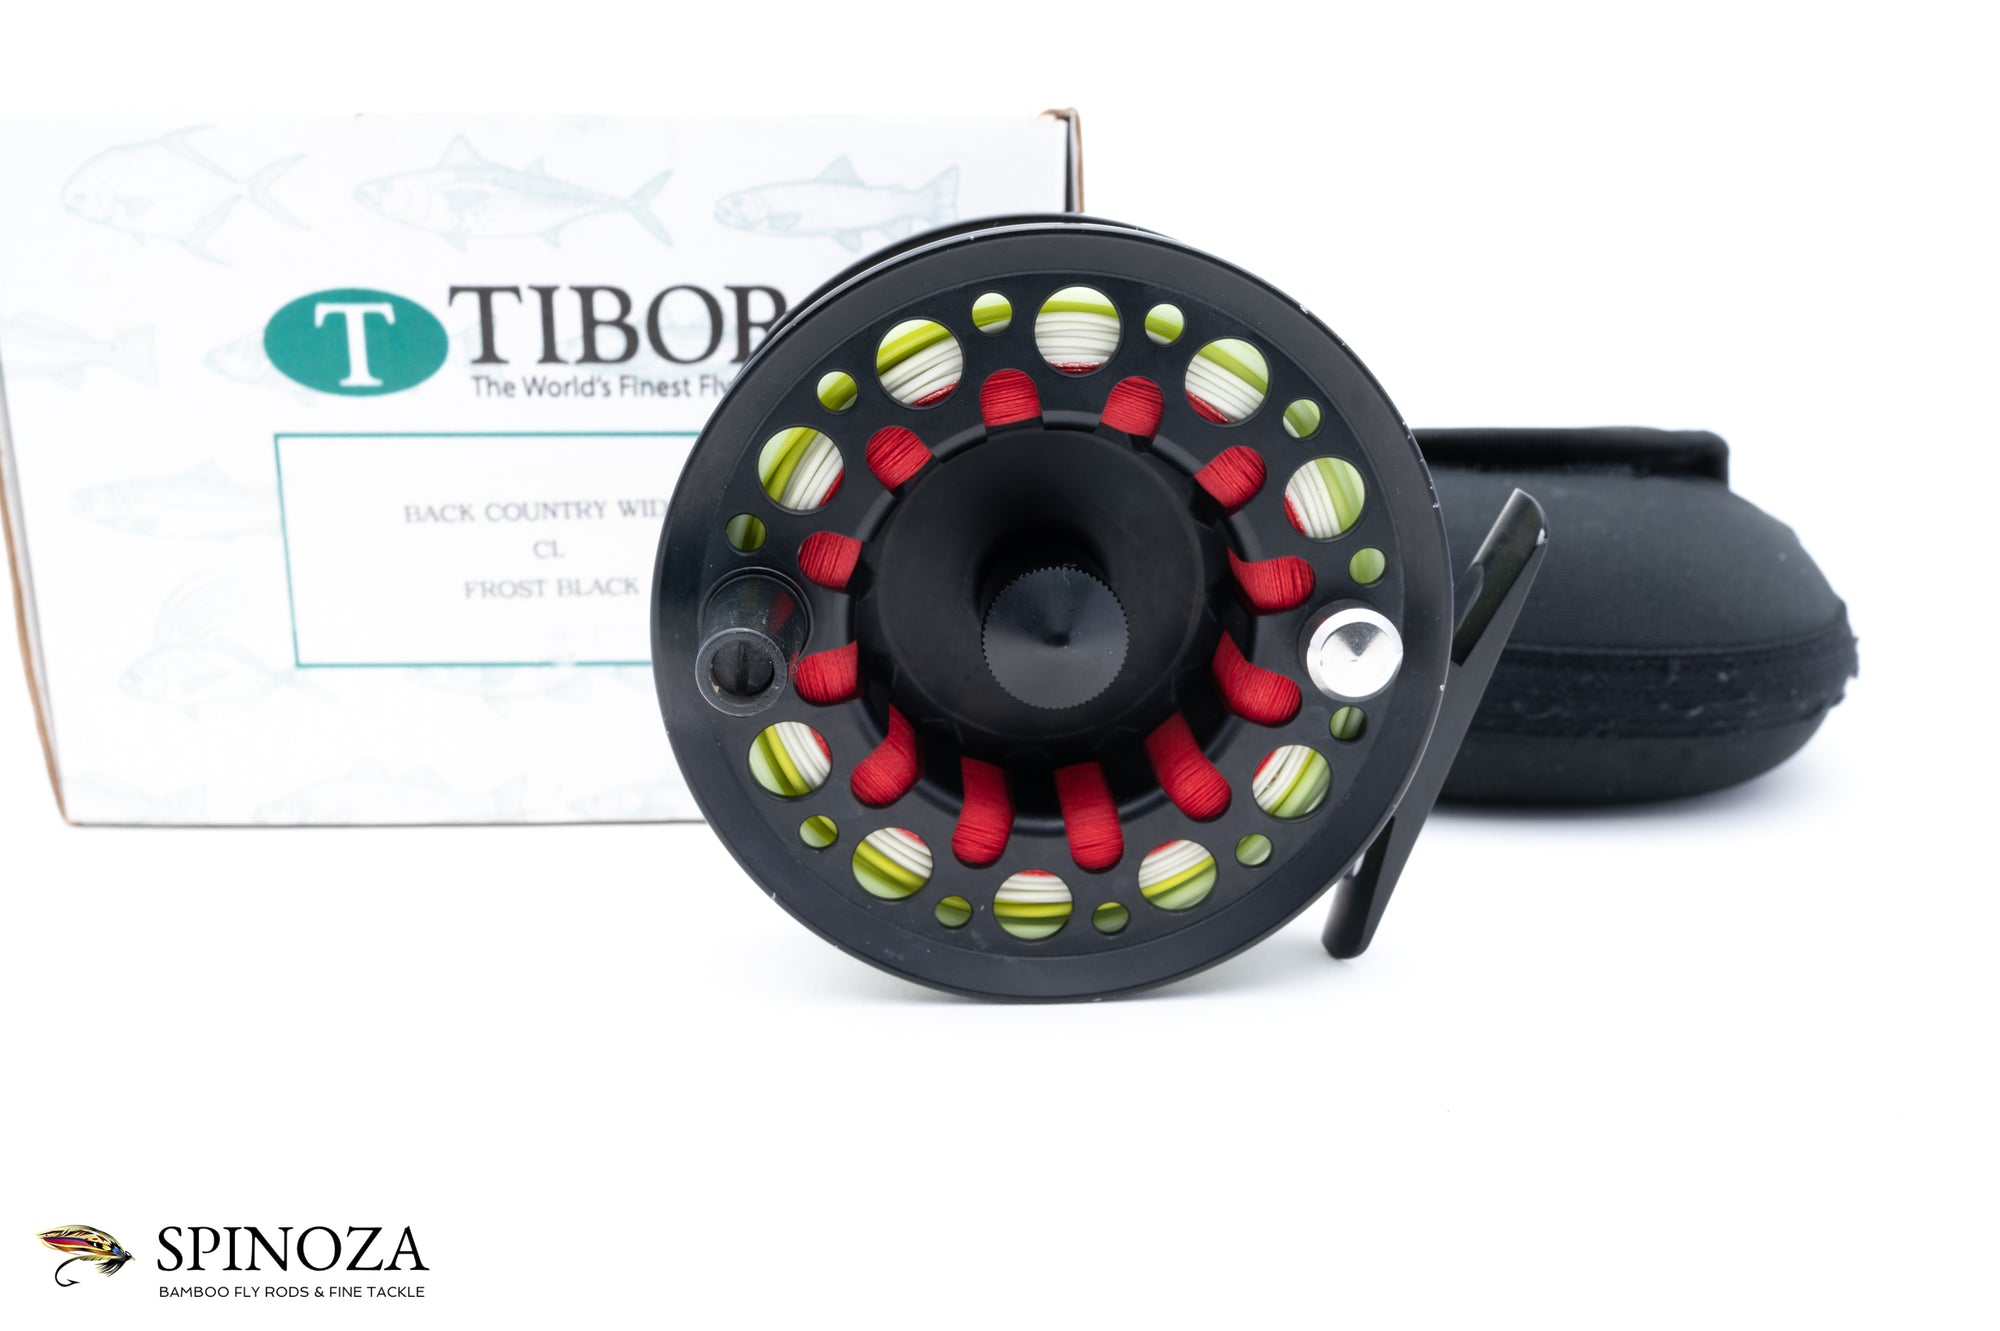 Tibor Backcountry CL Wide Fly Reel